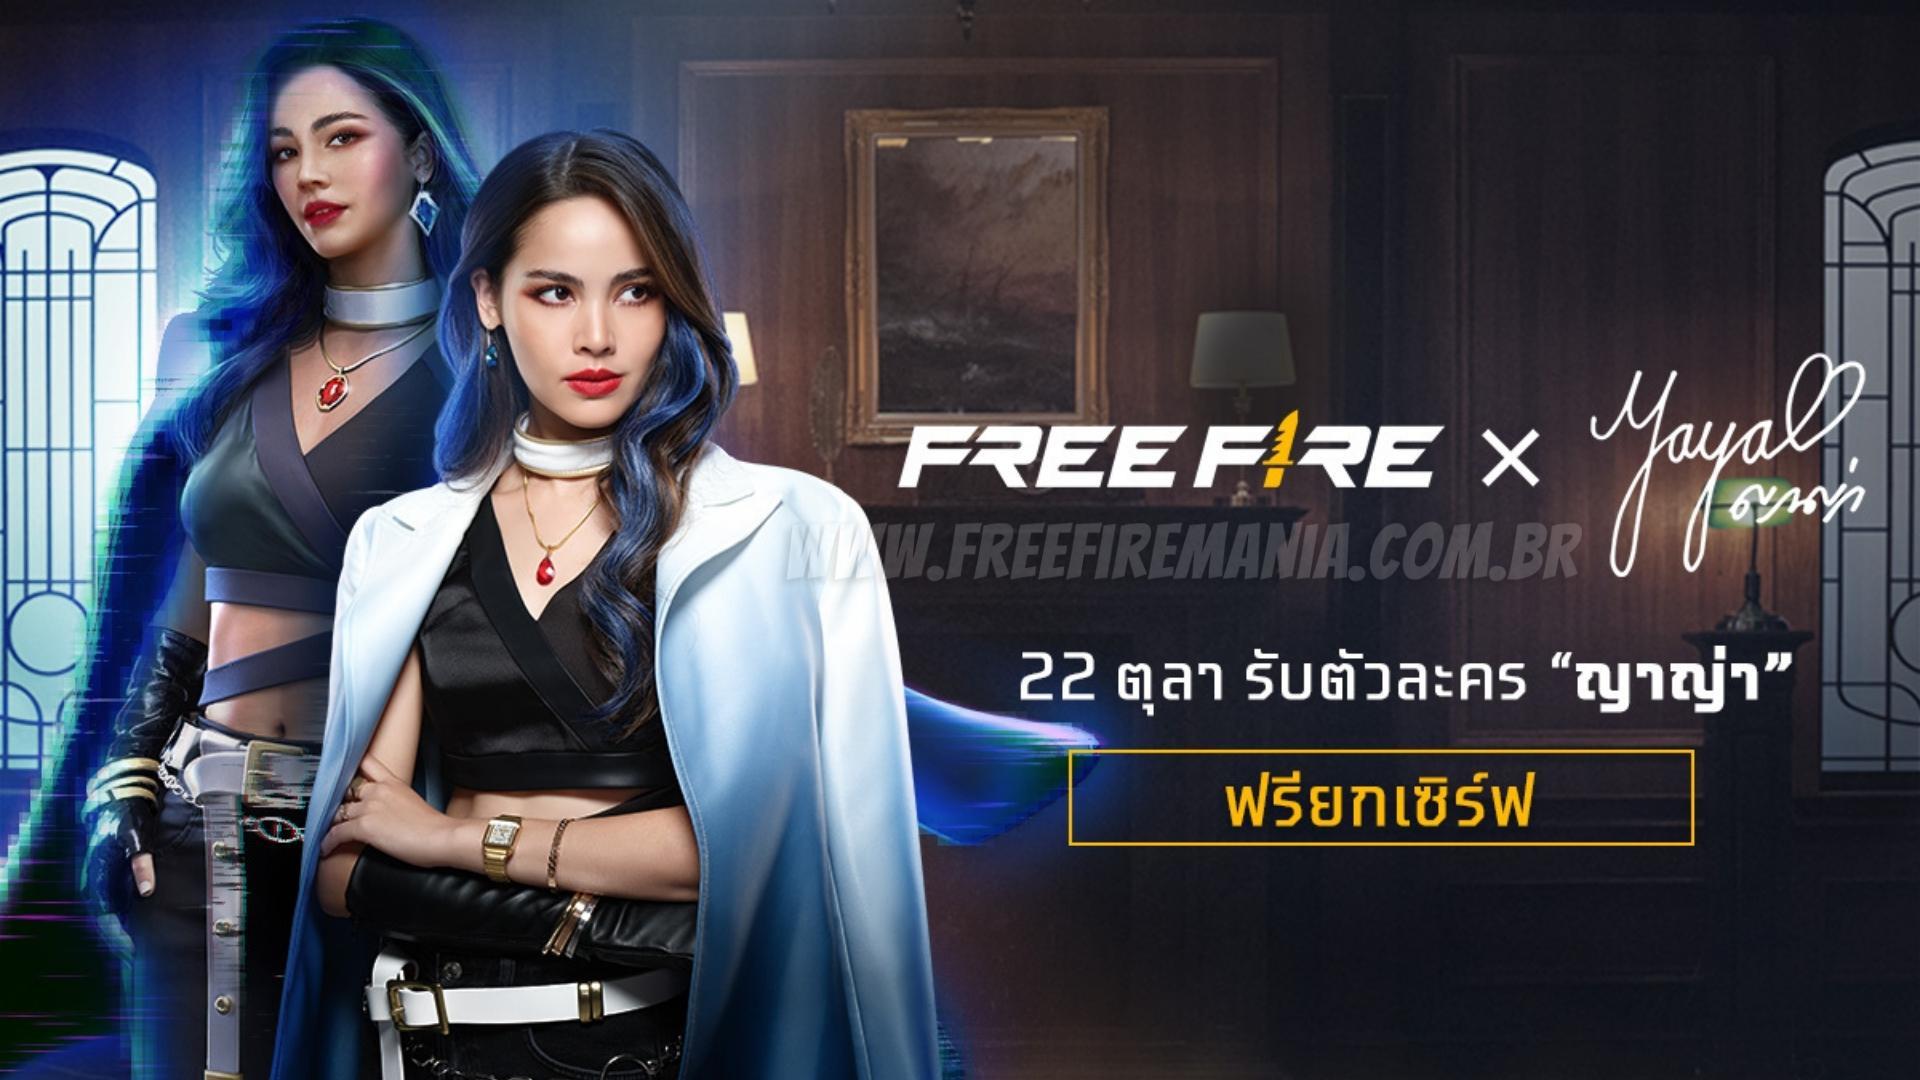 Luna Free Fire: meet the Thai artist who gave life to the new character